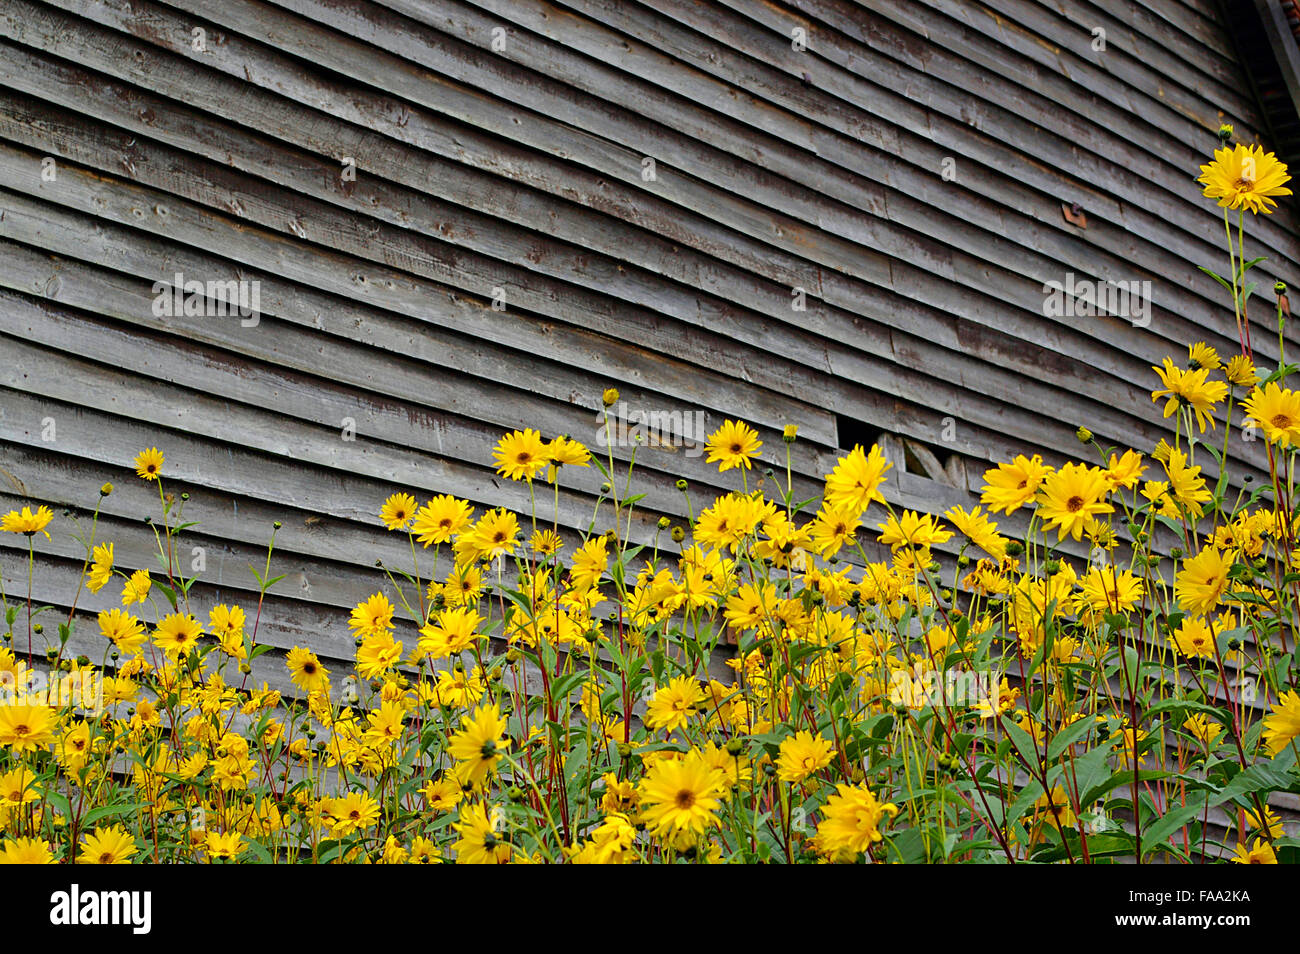 Wild flowers growing by a barn Stock Photo